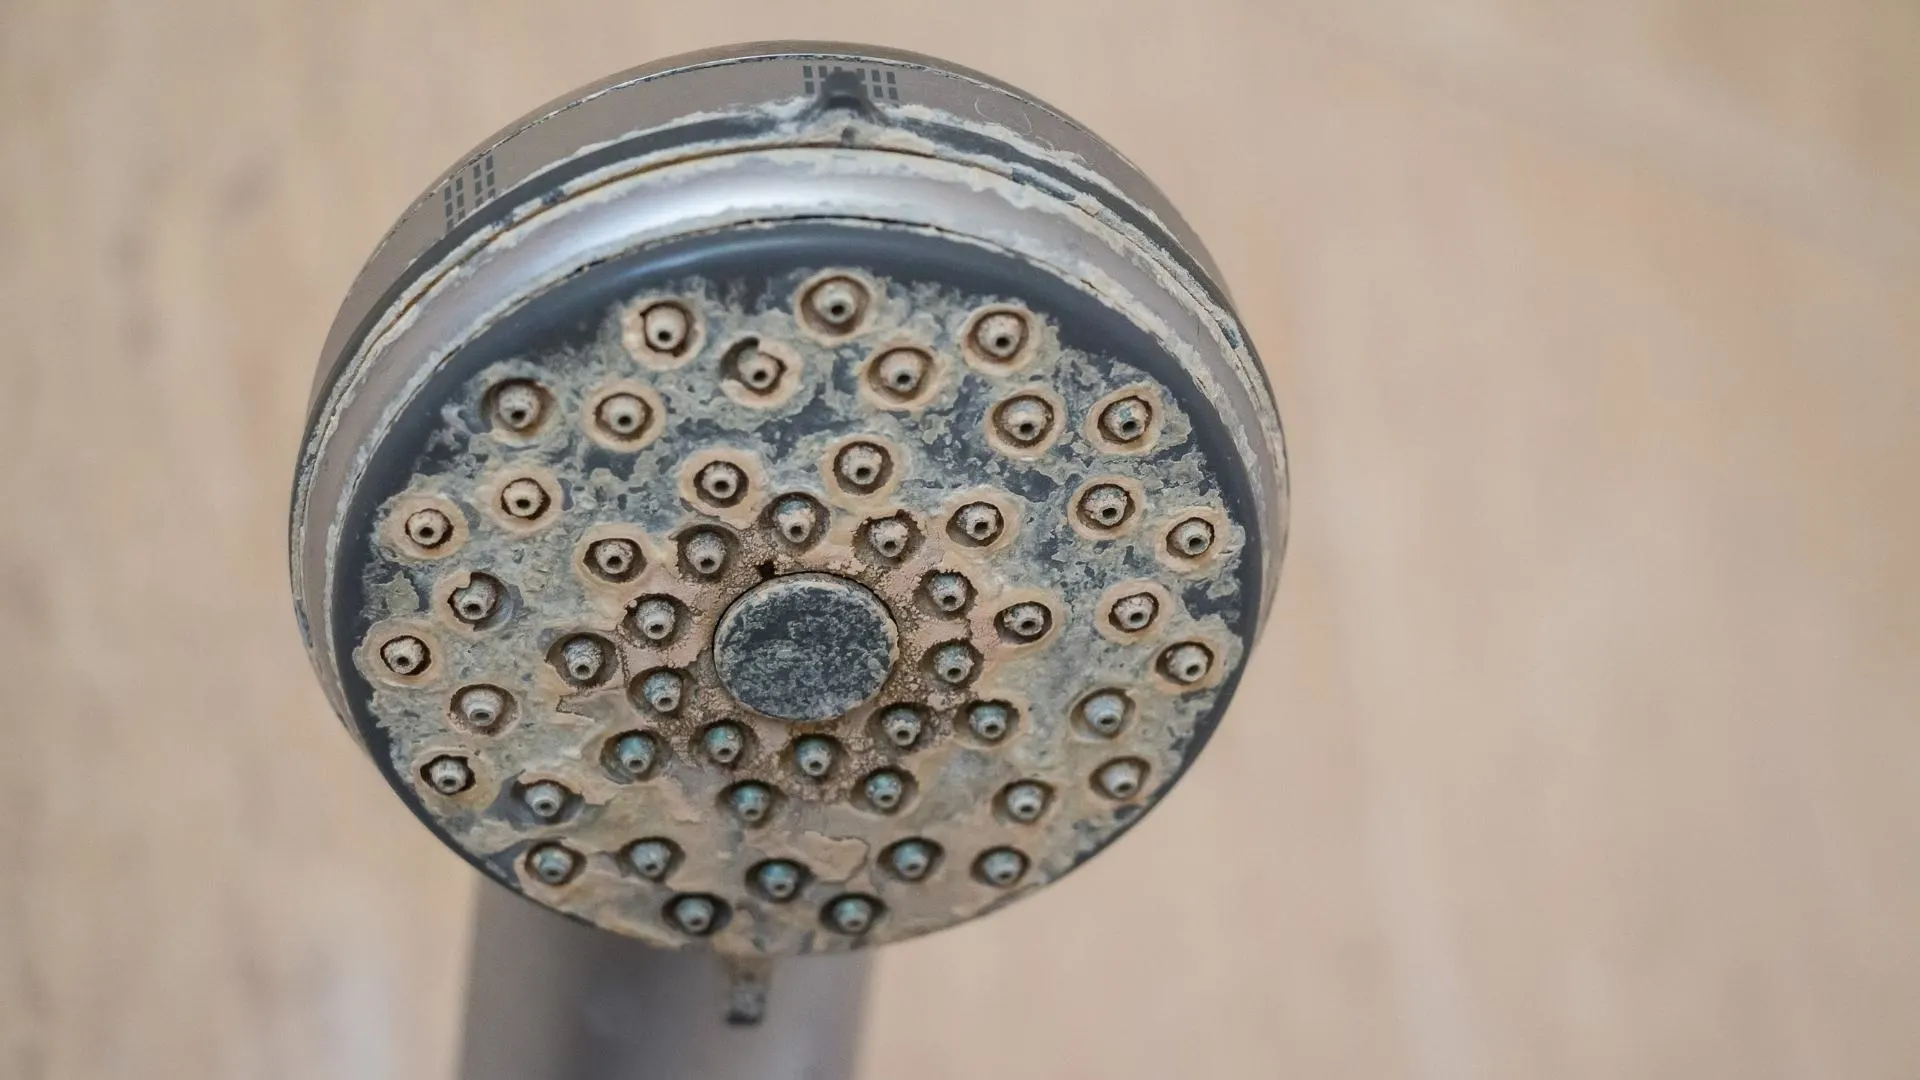 Photo of mineral deposits built up on a shower head causing rv shower head to be clogged